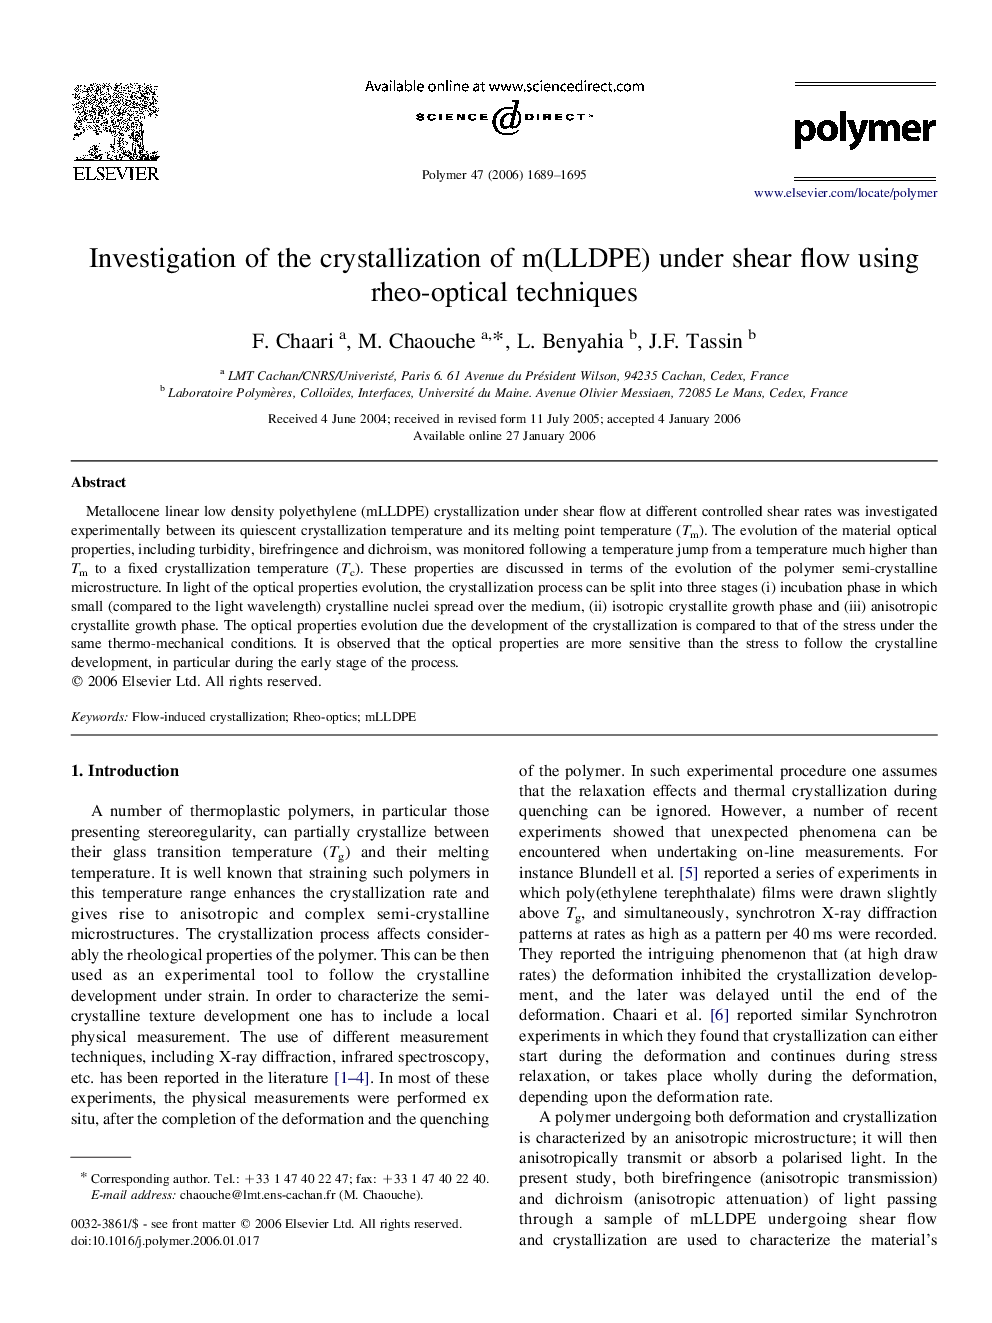 Investigation of the crystallization of m(LLDPE) under shear flow using rheo-optical techniques